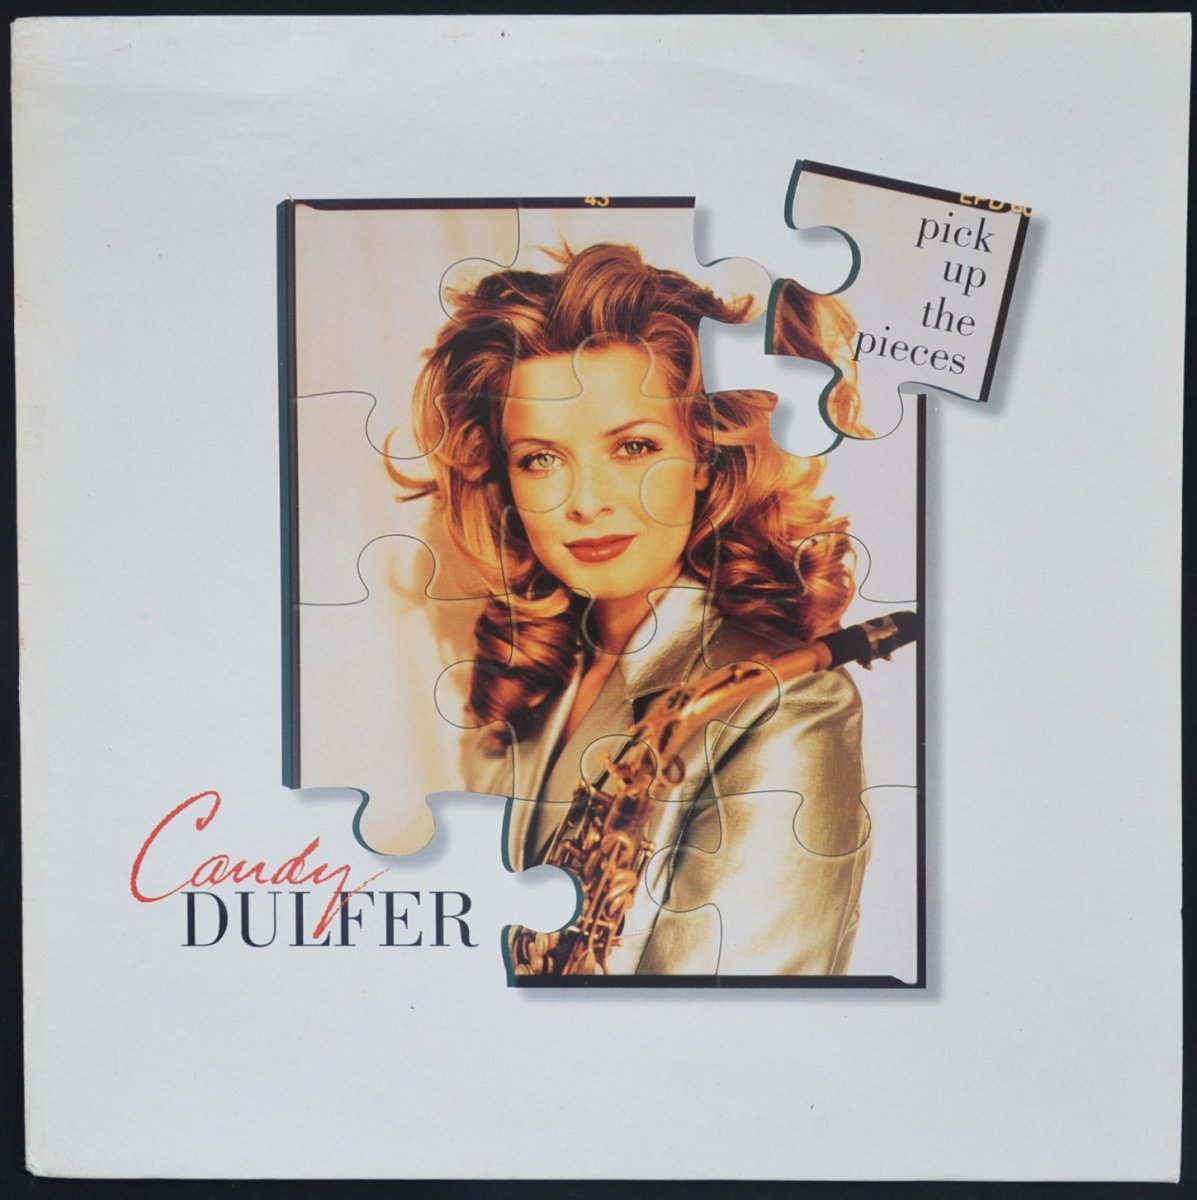 CANDY DULFER / PICK UP THE PIECES (12